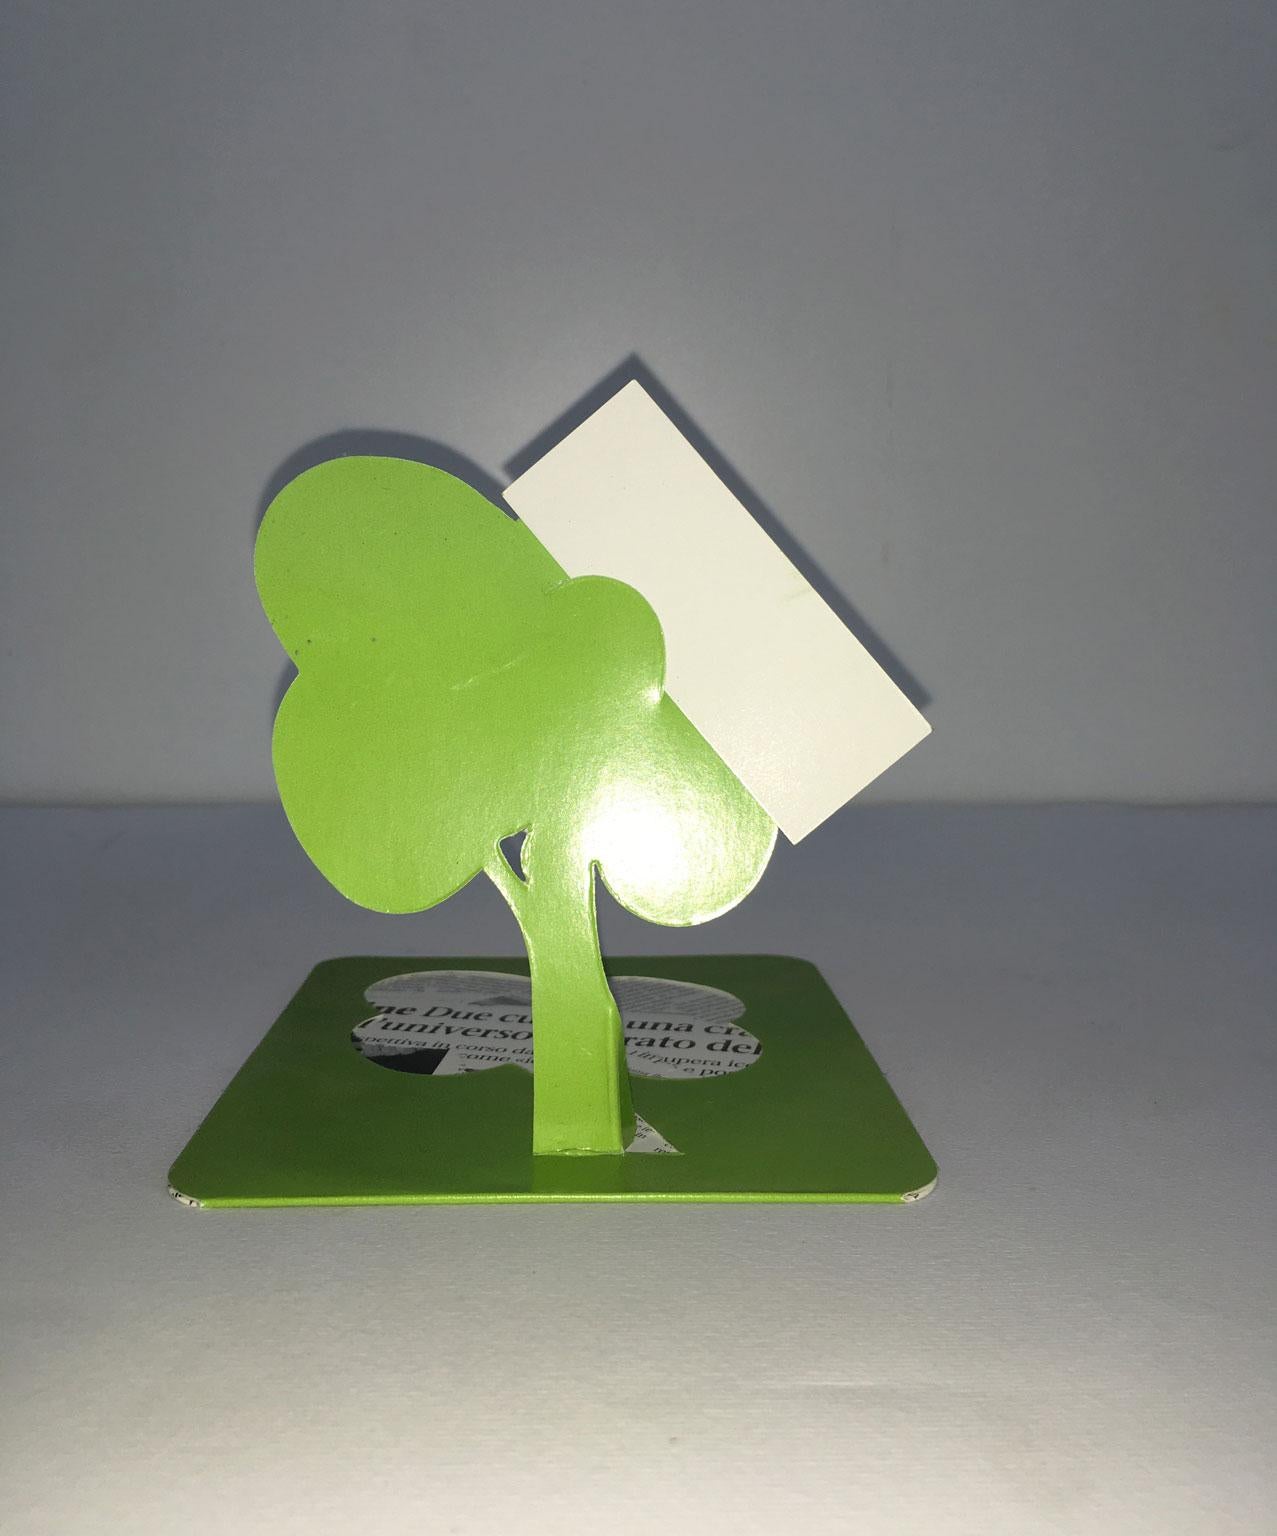 This little and nice sculpture is a cardholder. Cardboard and newspaper print are the materials.
The recycled paper of the newspaper represents one of the first times when the word 